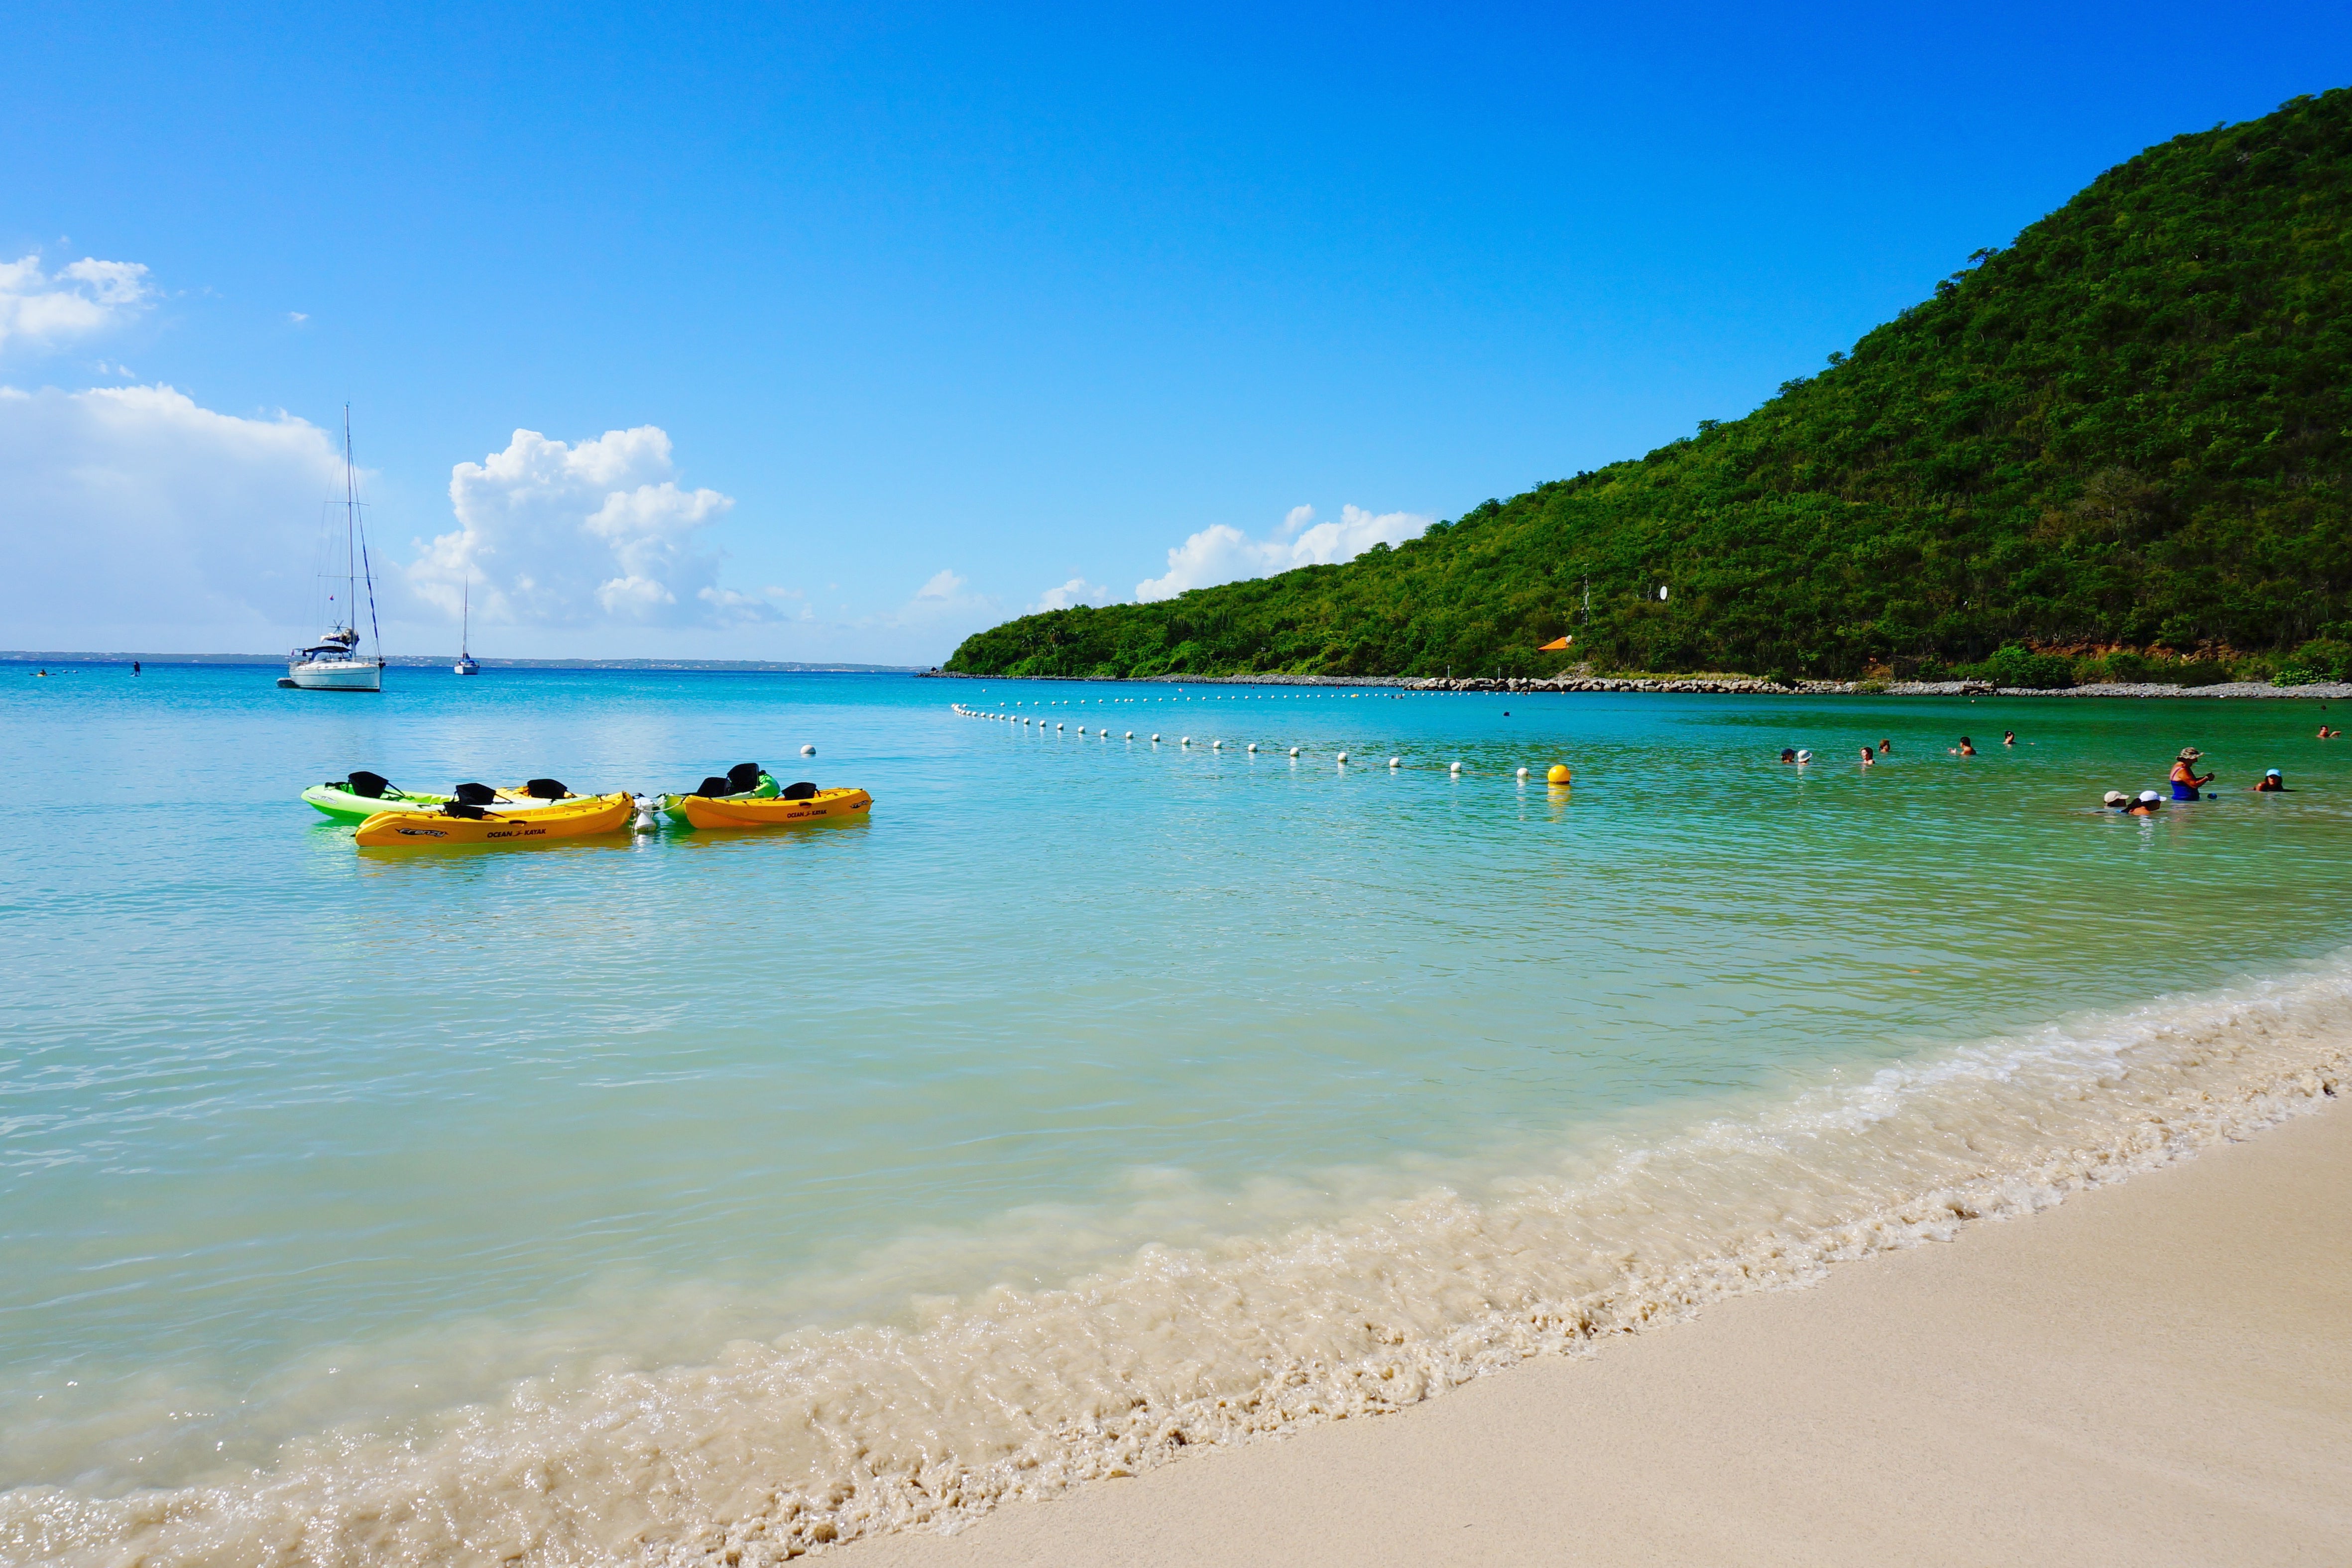 10 Reasons Why Your Next Trip Should Be: St. Maarten
